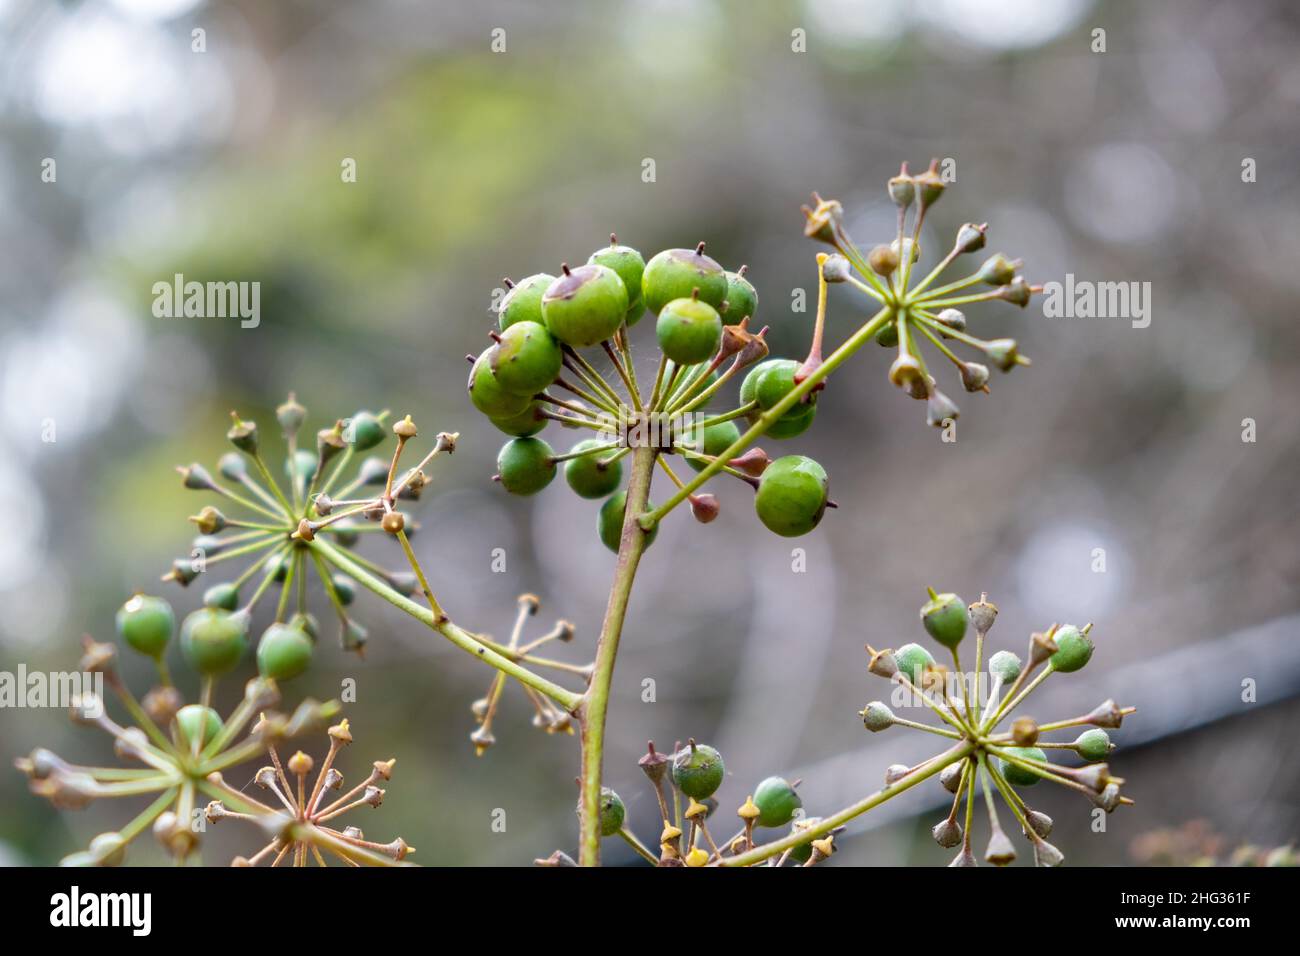 Fruits of the Common Ivy against blurred background Stock Photo